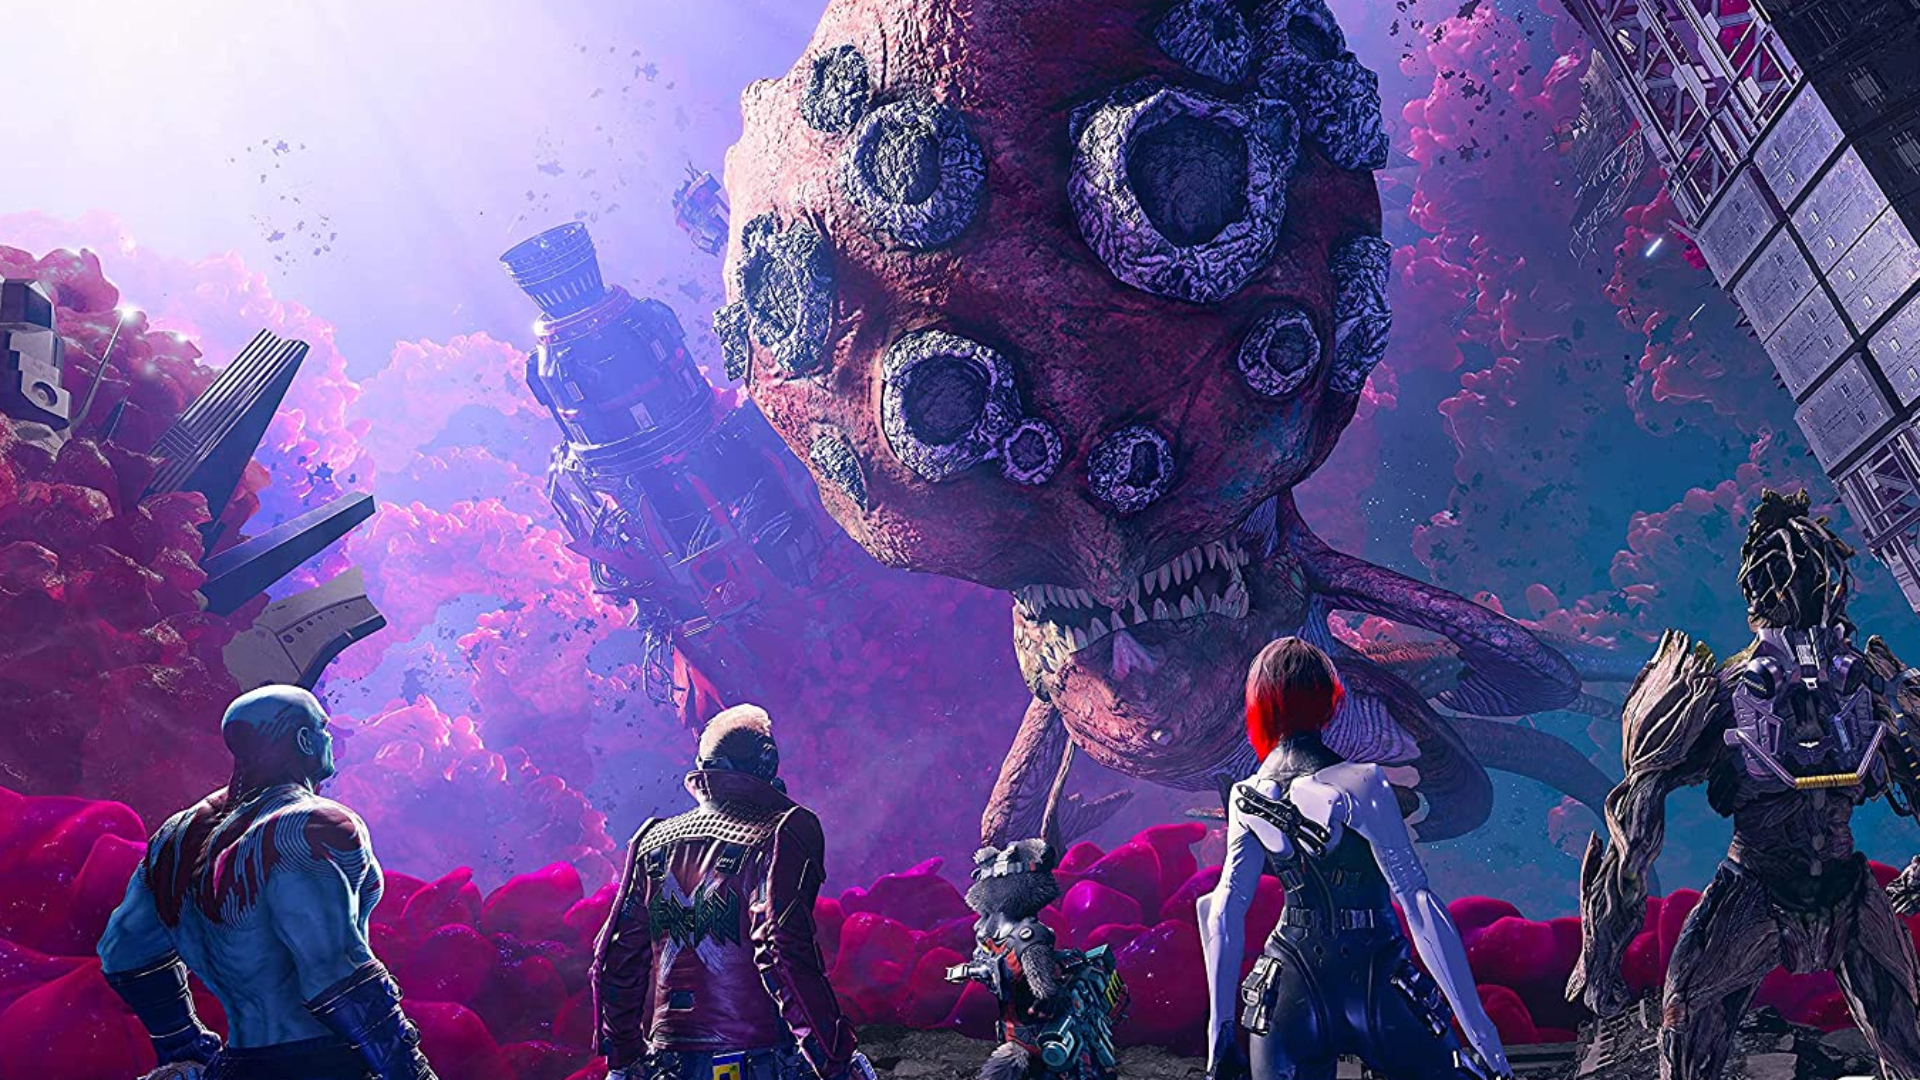 The guardians facing a giant monster